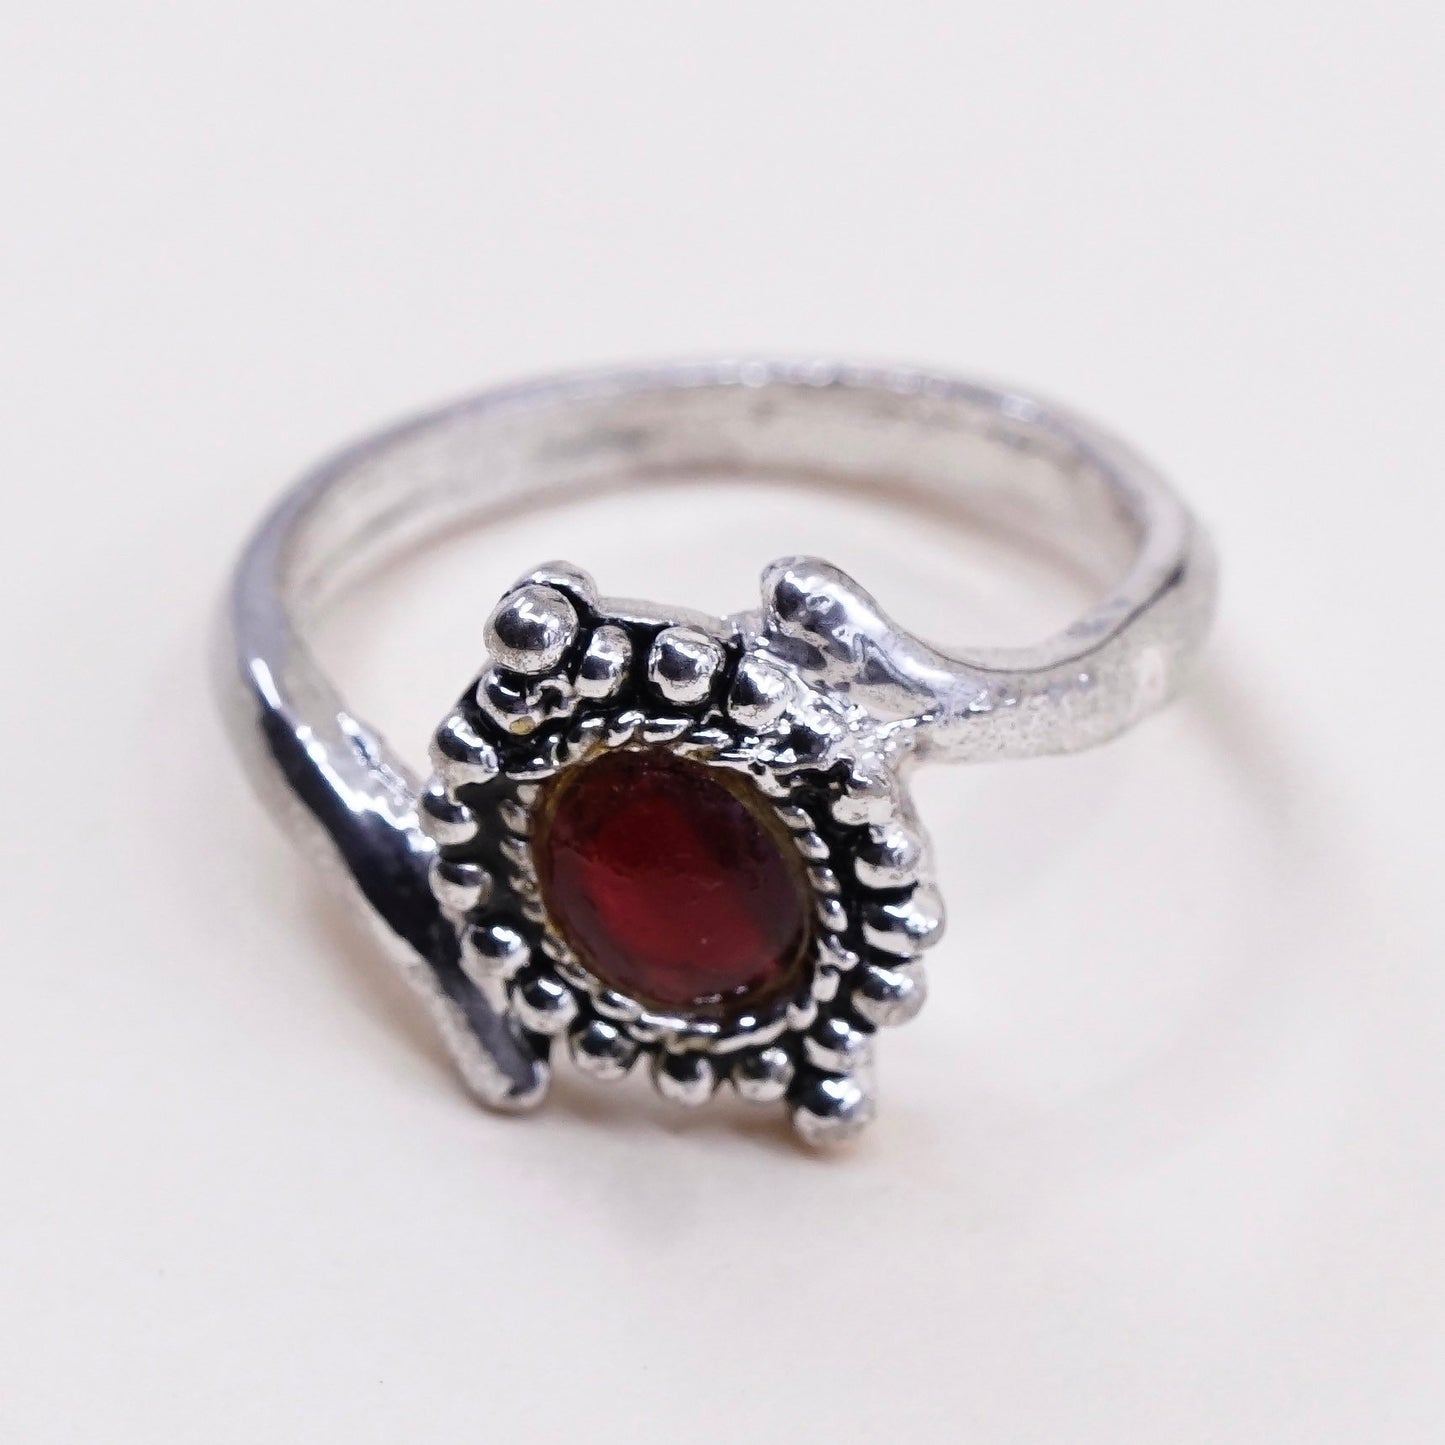 Size 7.5, vintage modern silver tone ring w/ red glass details